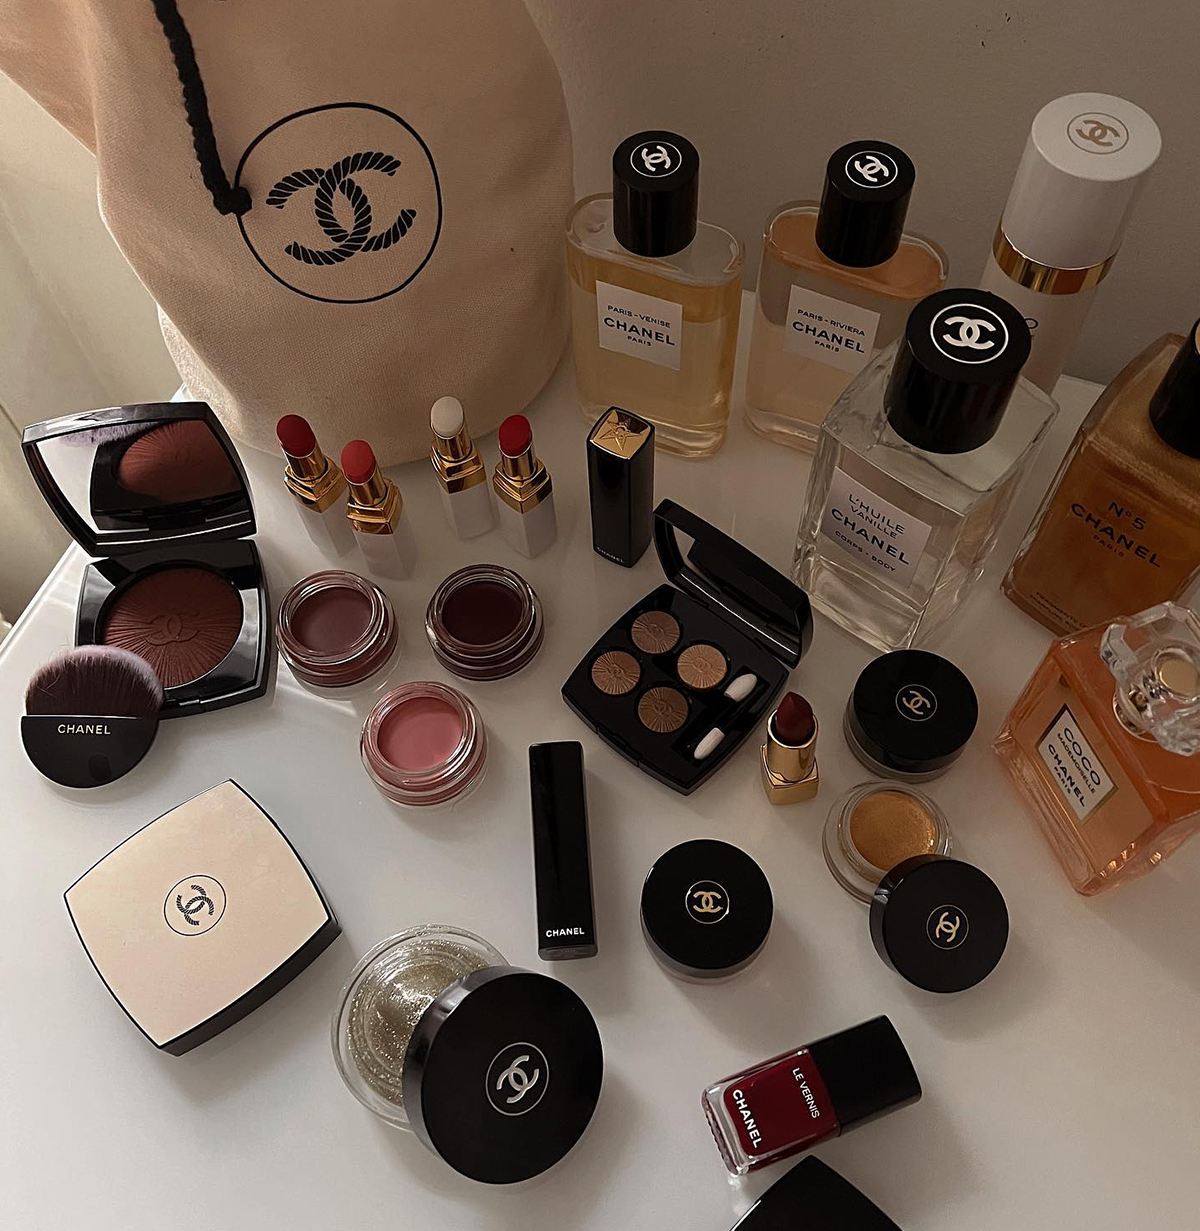 Ingeniører Spytte ud Ministerium The 18 Best Luxury Makeup Brands of 2022 | Who What Wear